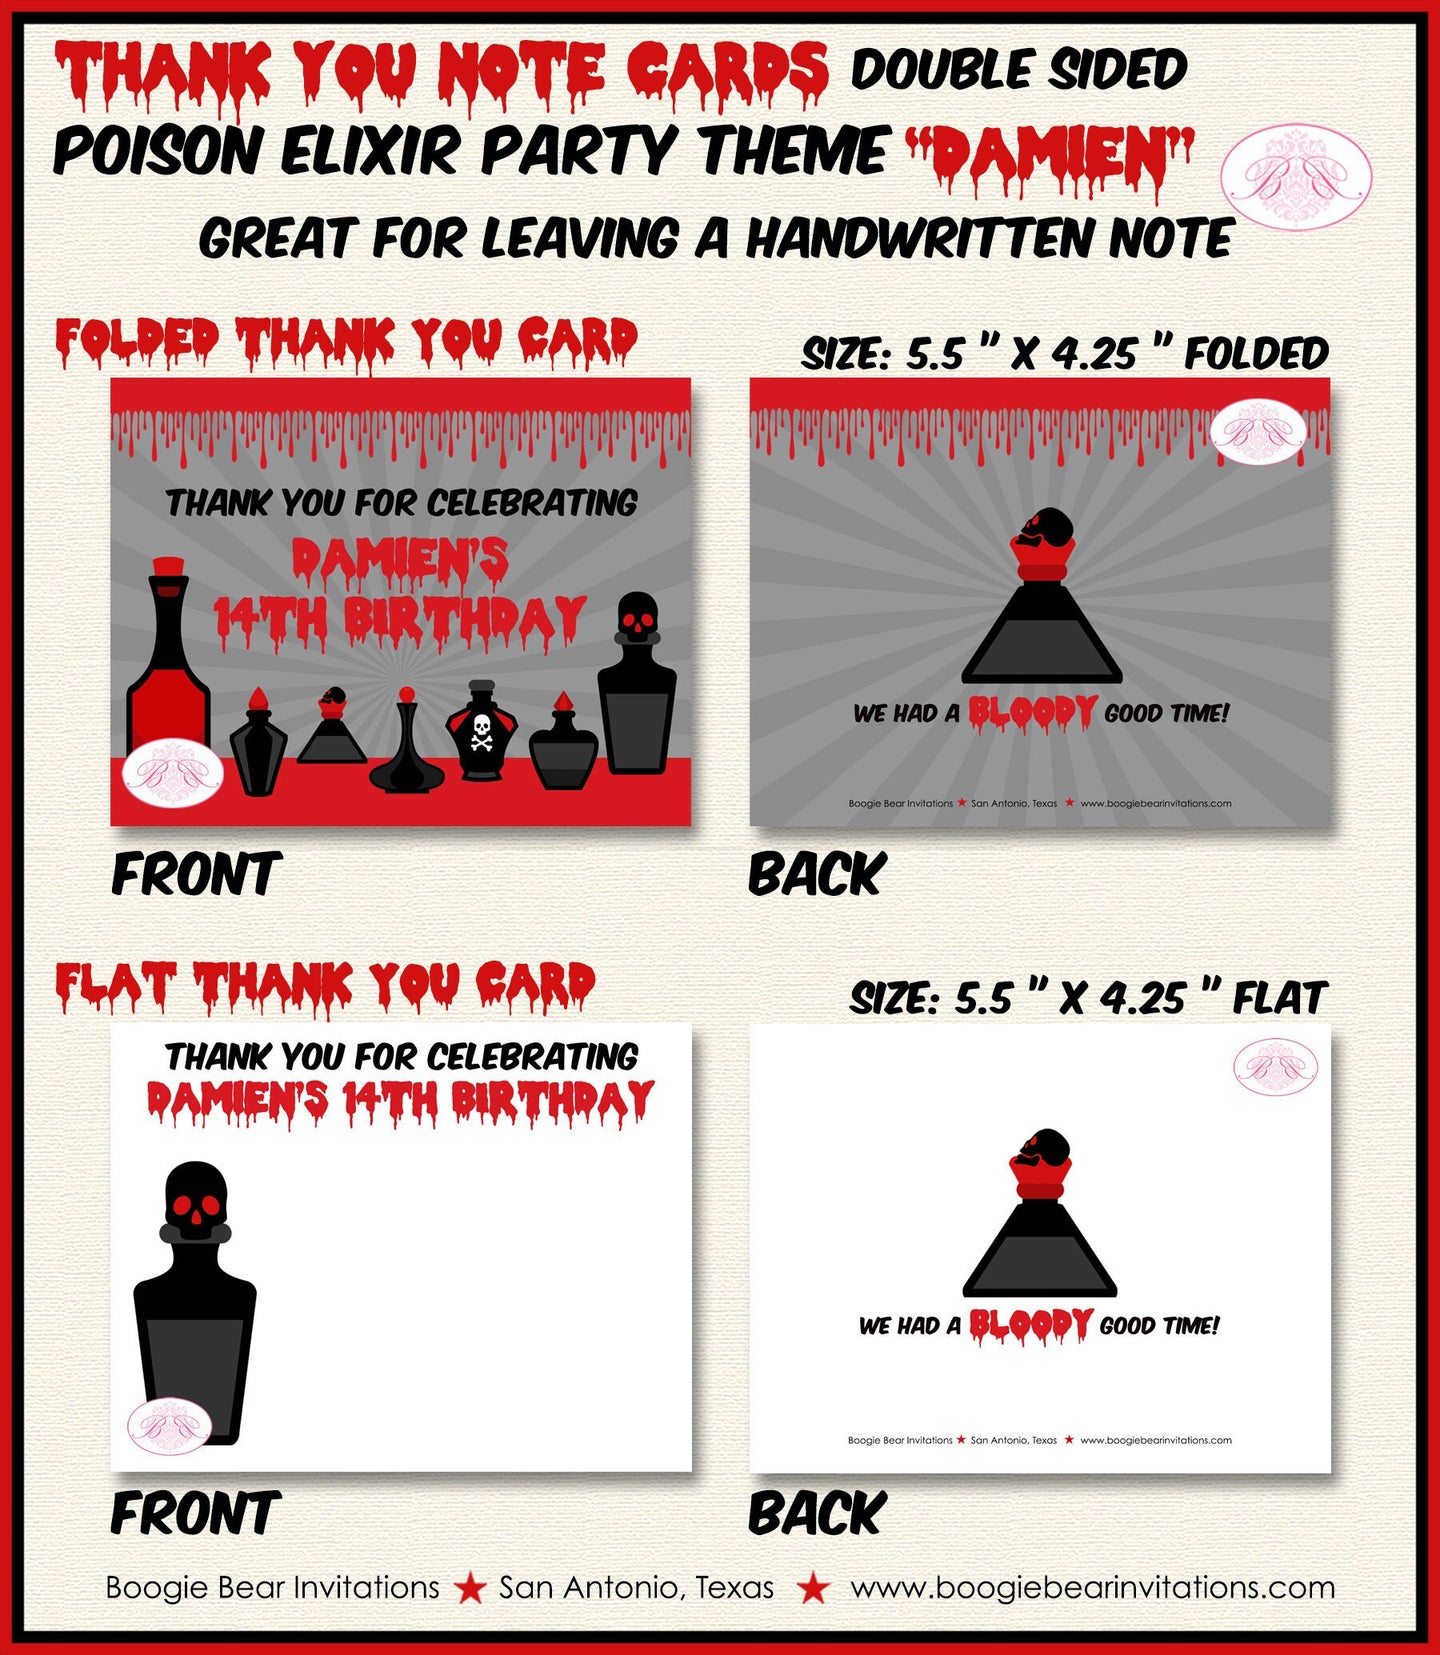 Poison Elixir Party Thank You Card Note Birthday Red Black Halloween Cocktail Spell Boogie Bear Invitations Damien Theme Printed